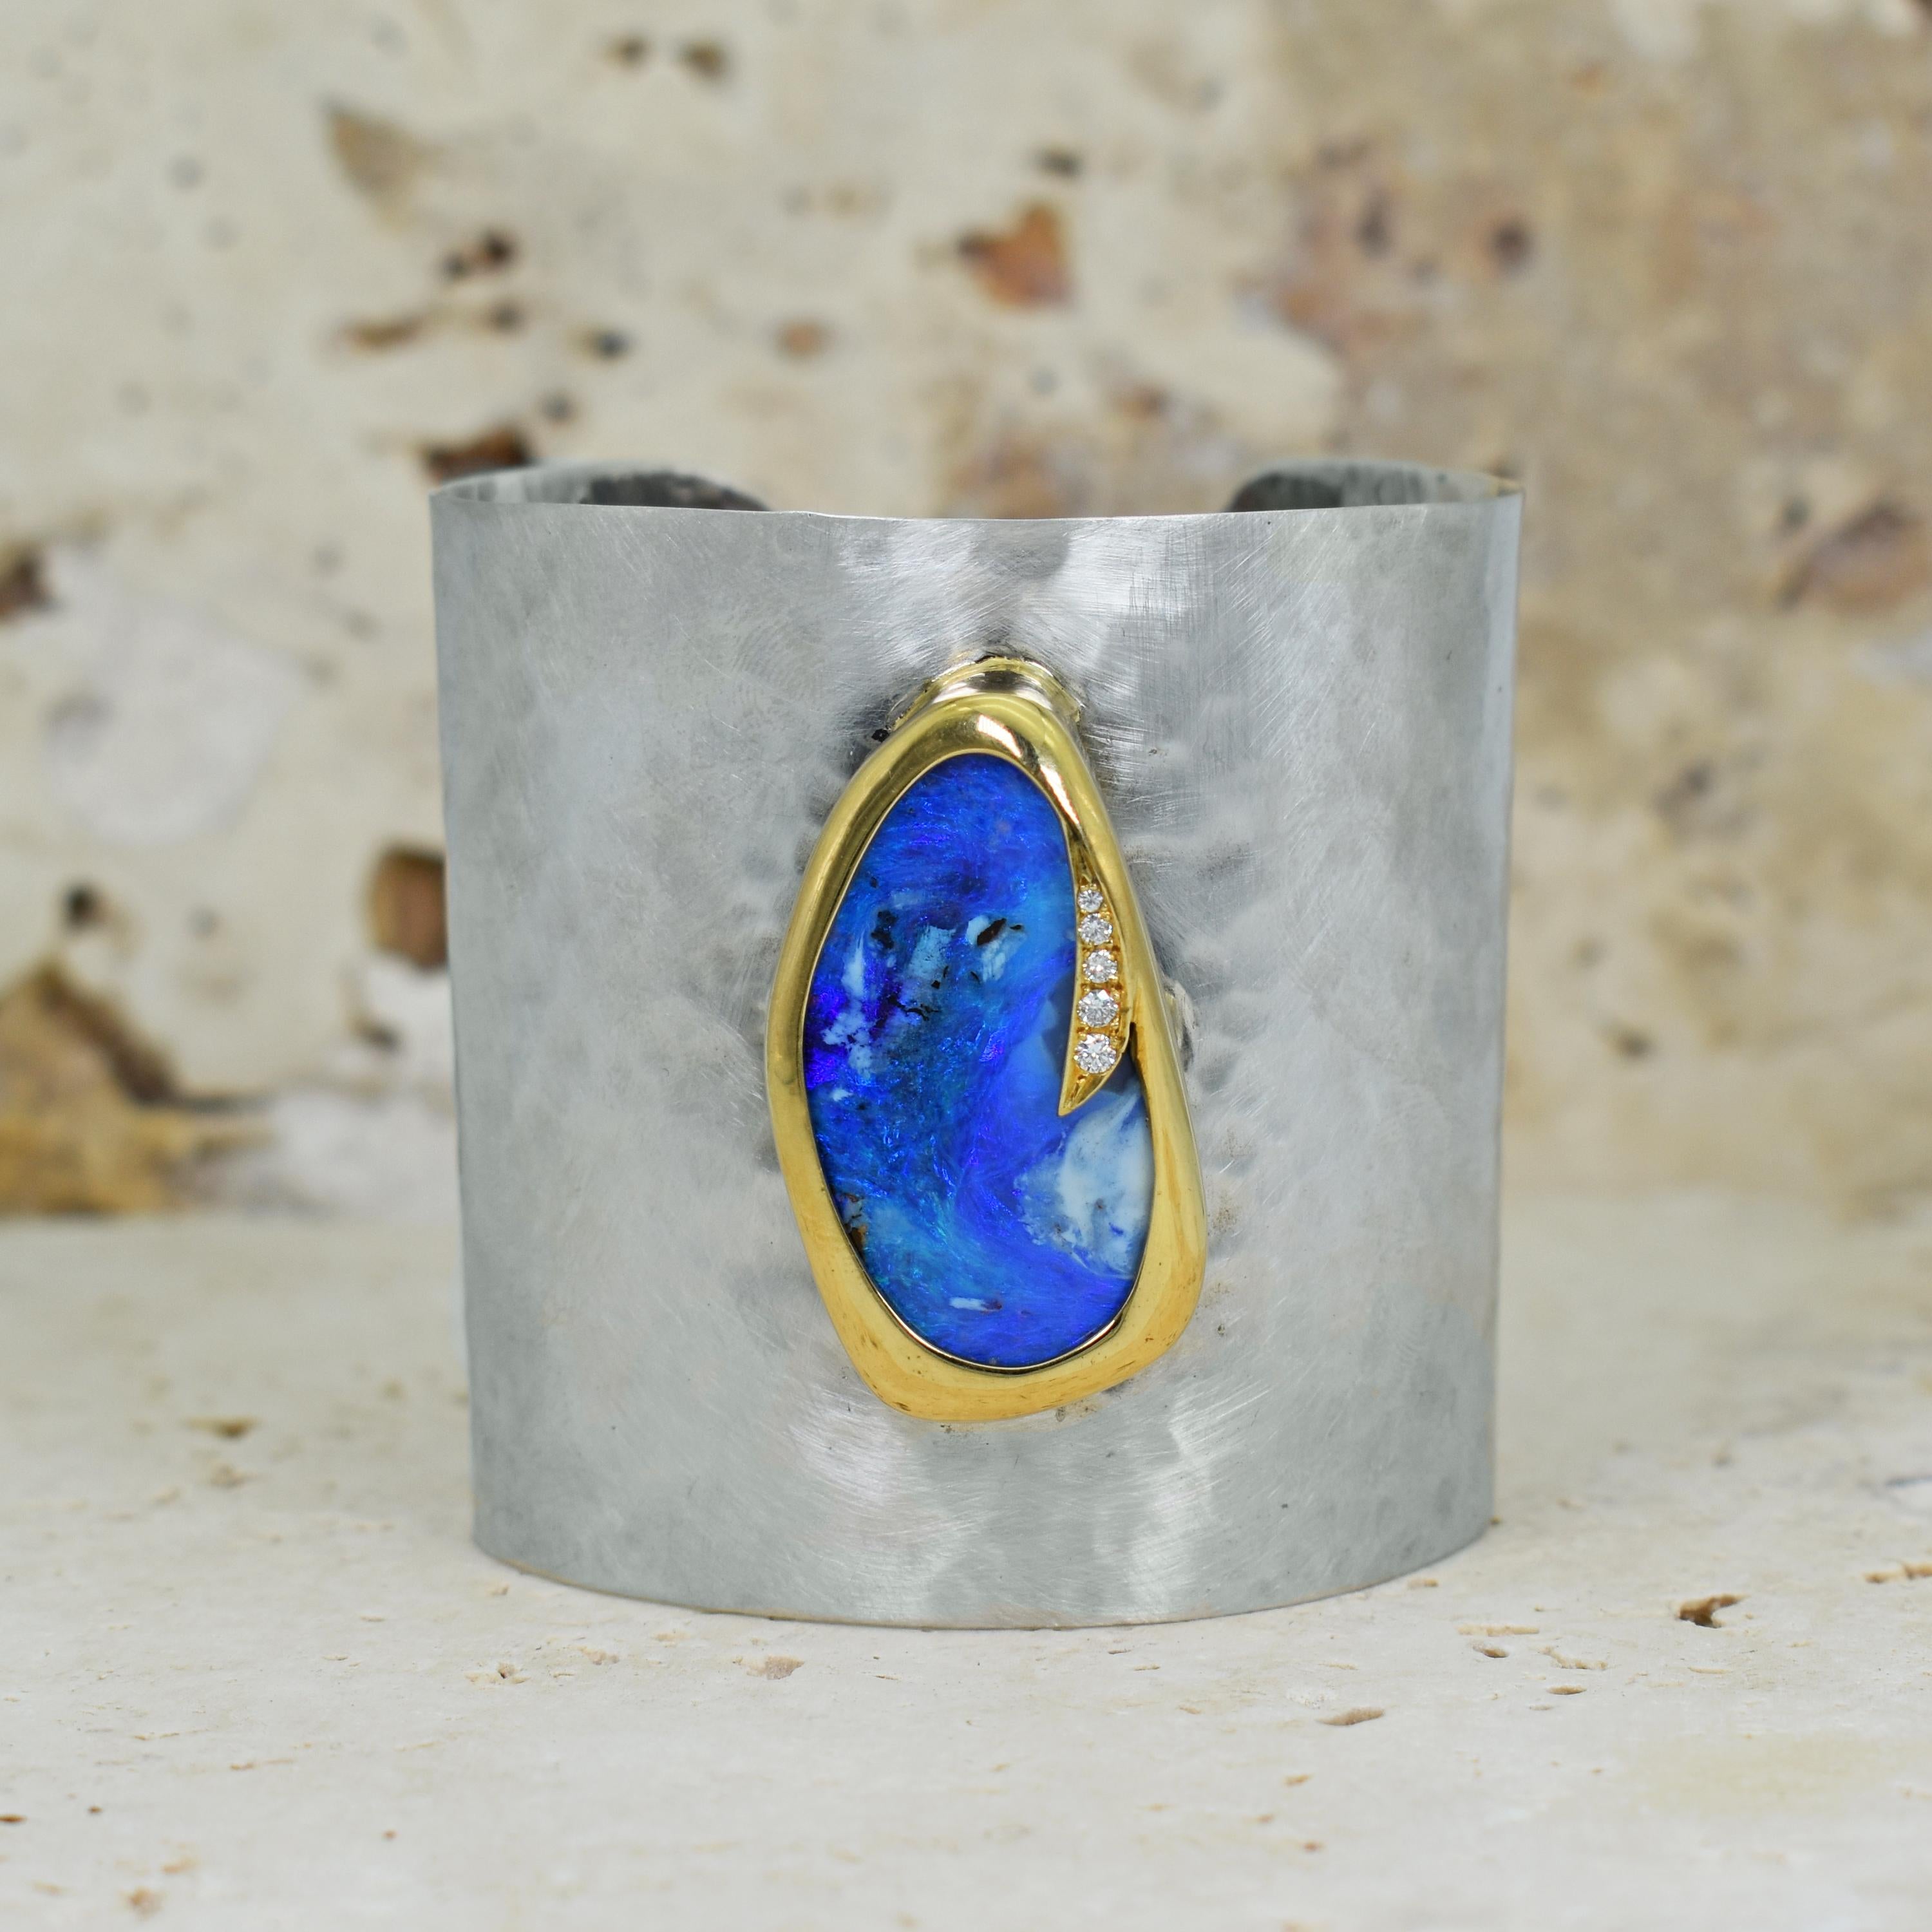 Gorgeous blue Australian Boulder Opal and accent white Diamonds (0.12 total carat, SI2, G-H) set in 18k yellow gold bezel on a hammered sterling silver cuff bracelet with a brushed, satin finish. Cuff bracelet is 2.25 inches wide.